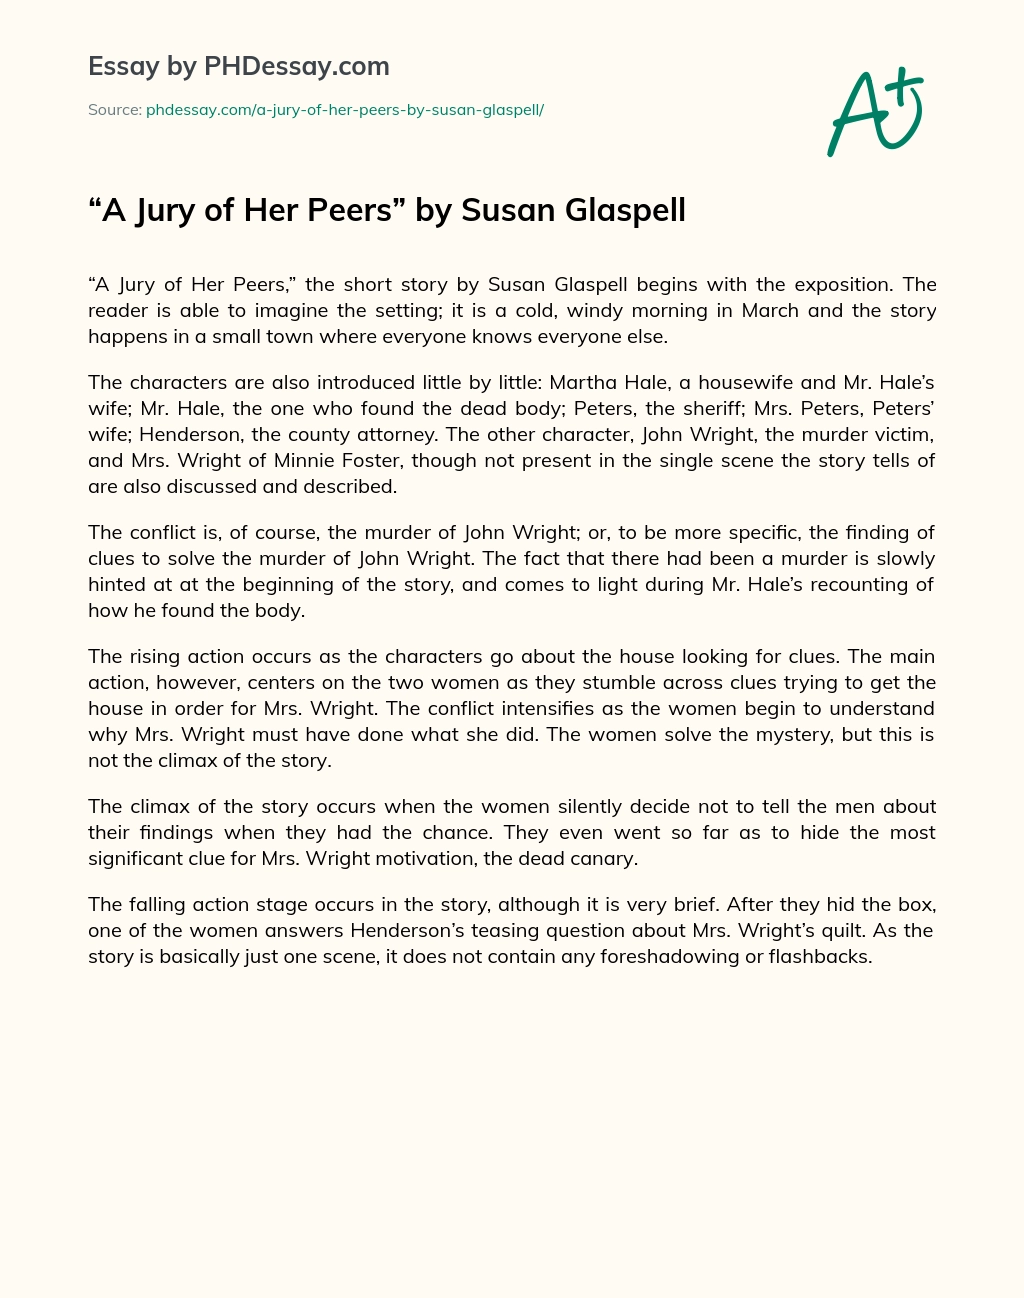 A Jury of Her Peers by Susan Glaspell essay